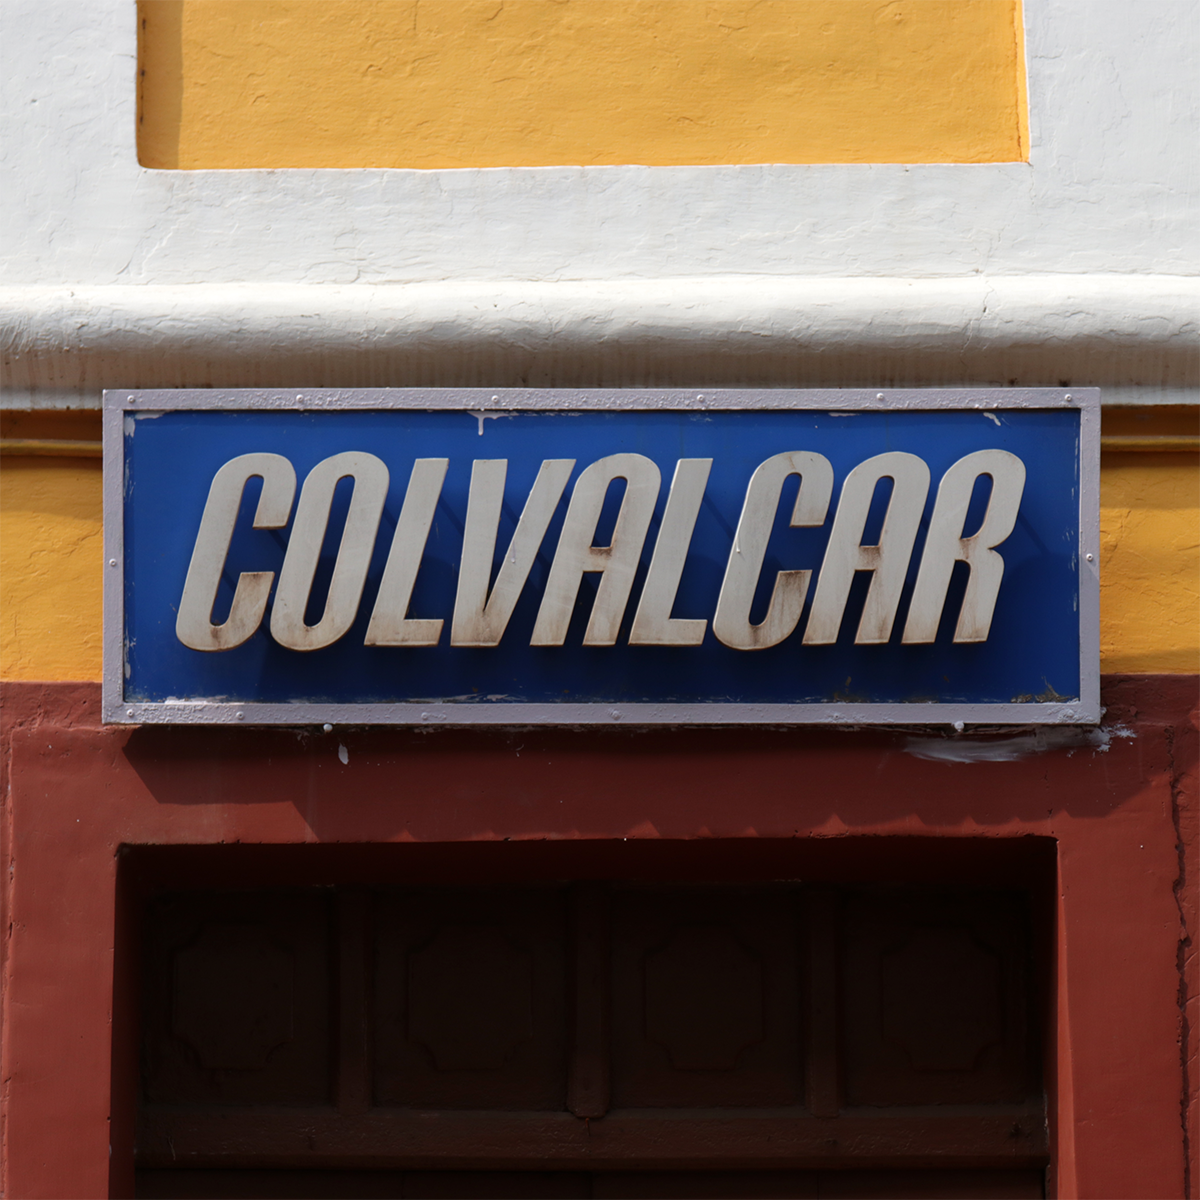 Covalcar_small.png